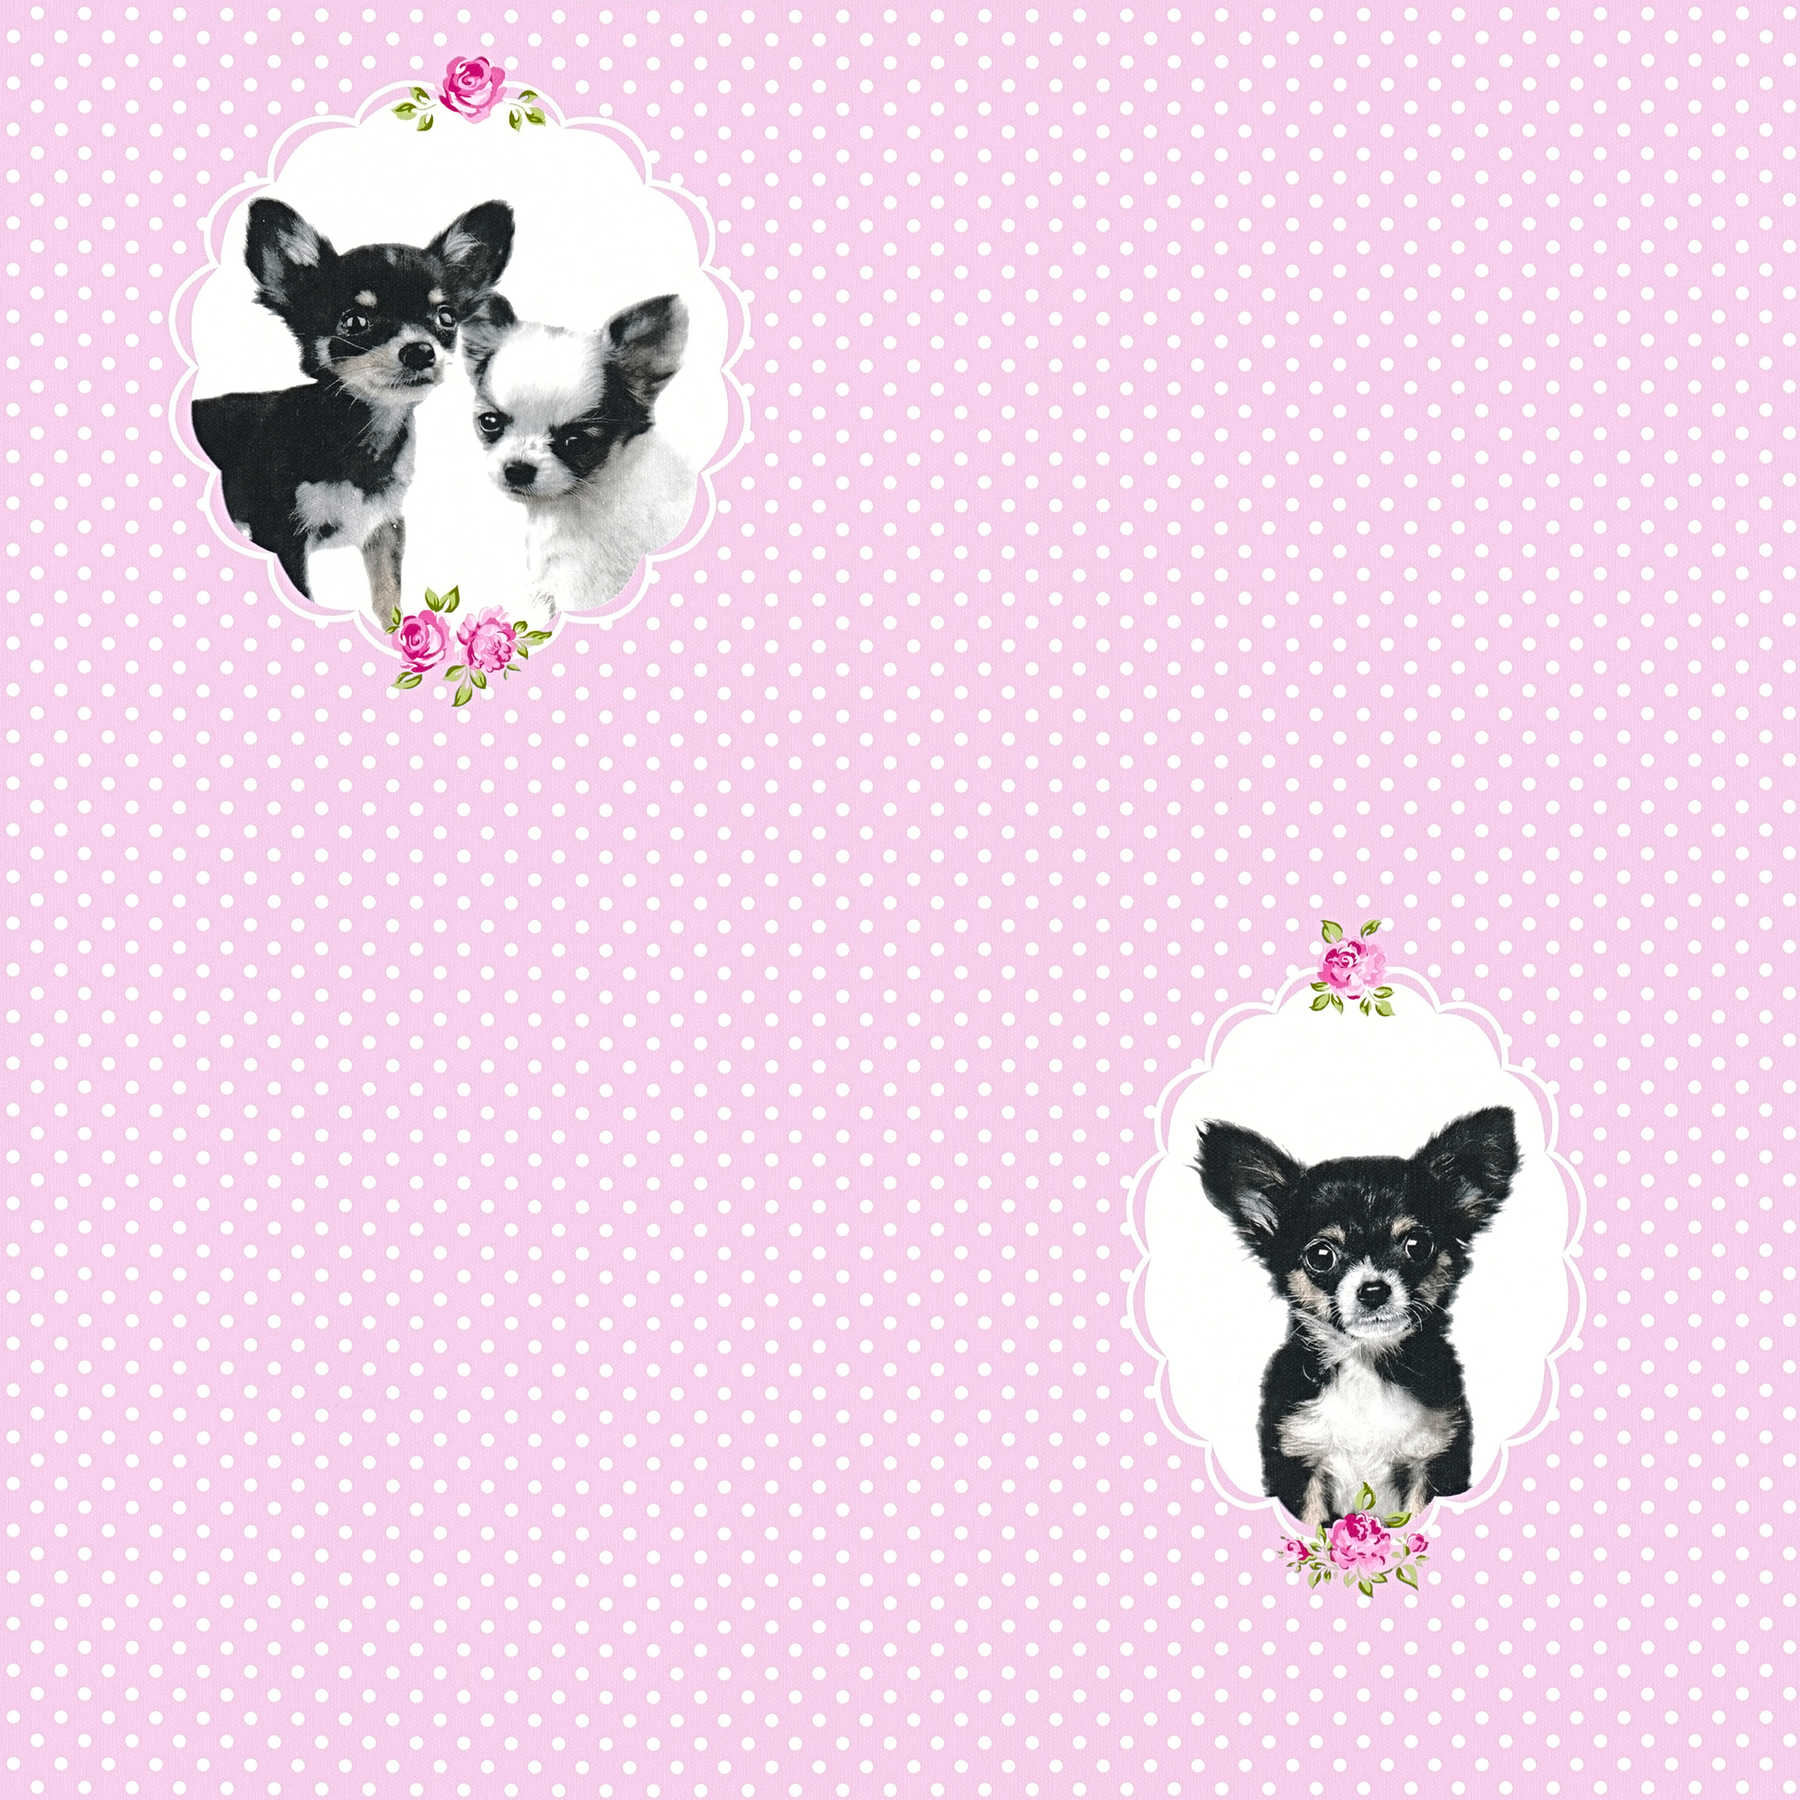 Pink dots wallpaper with dogs portraits - Pink
